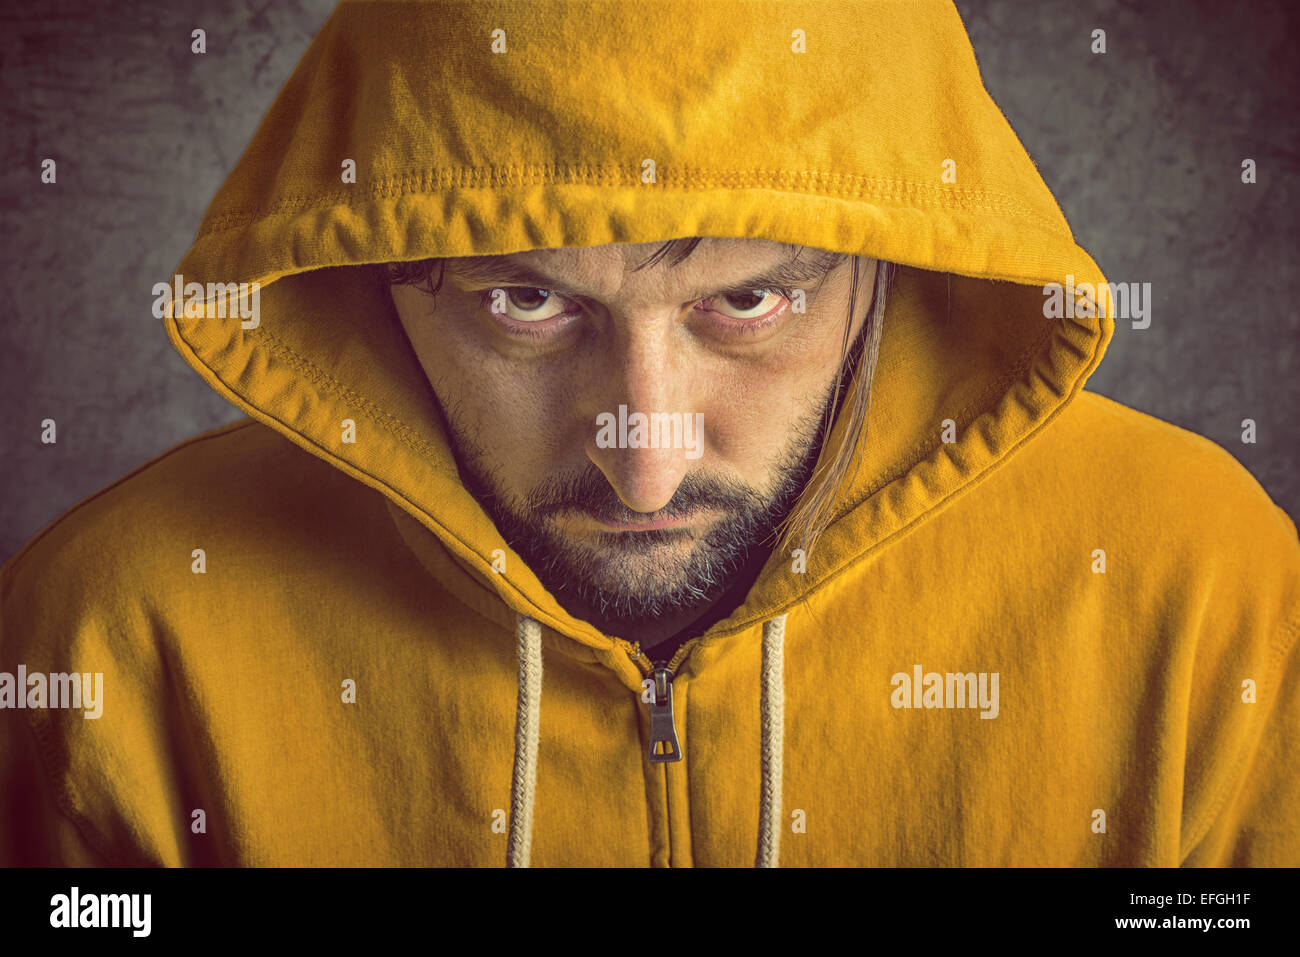 Adult Bearded Man Wearing Yellow Hooded Jacket, Looking At Camera Stock Photo